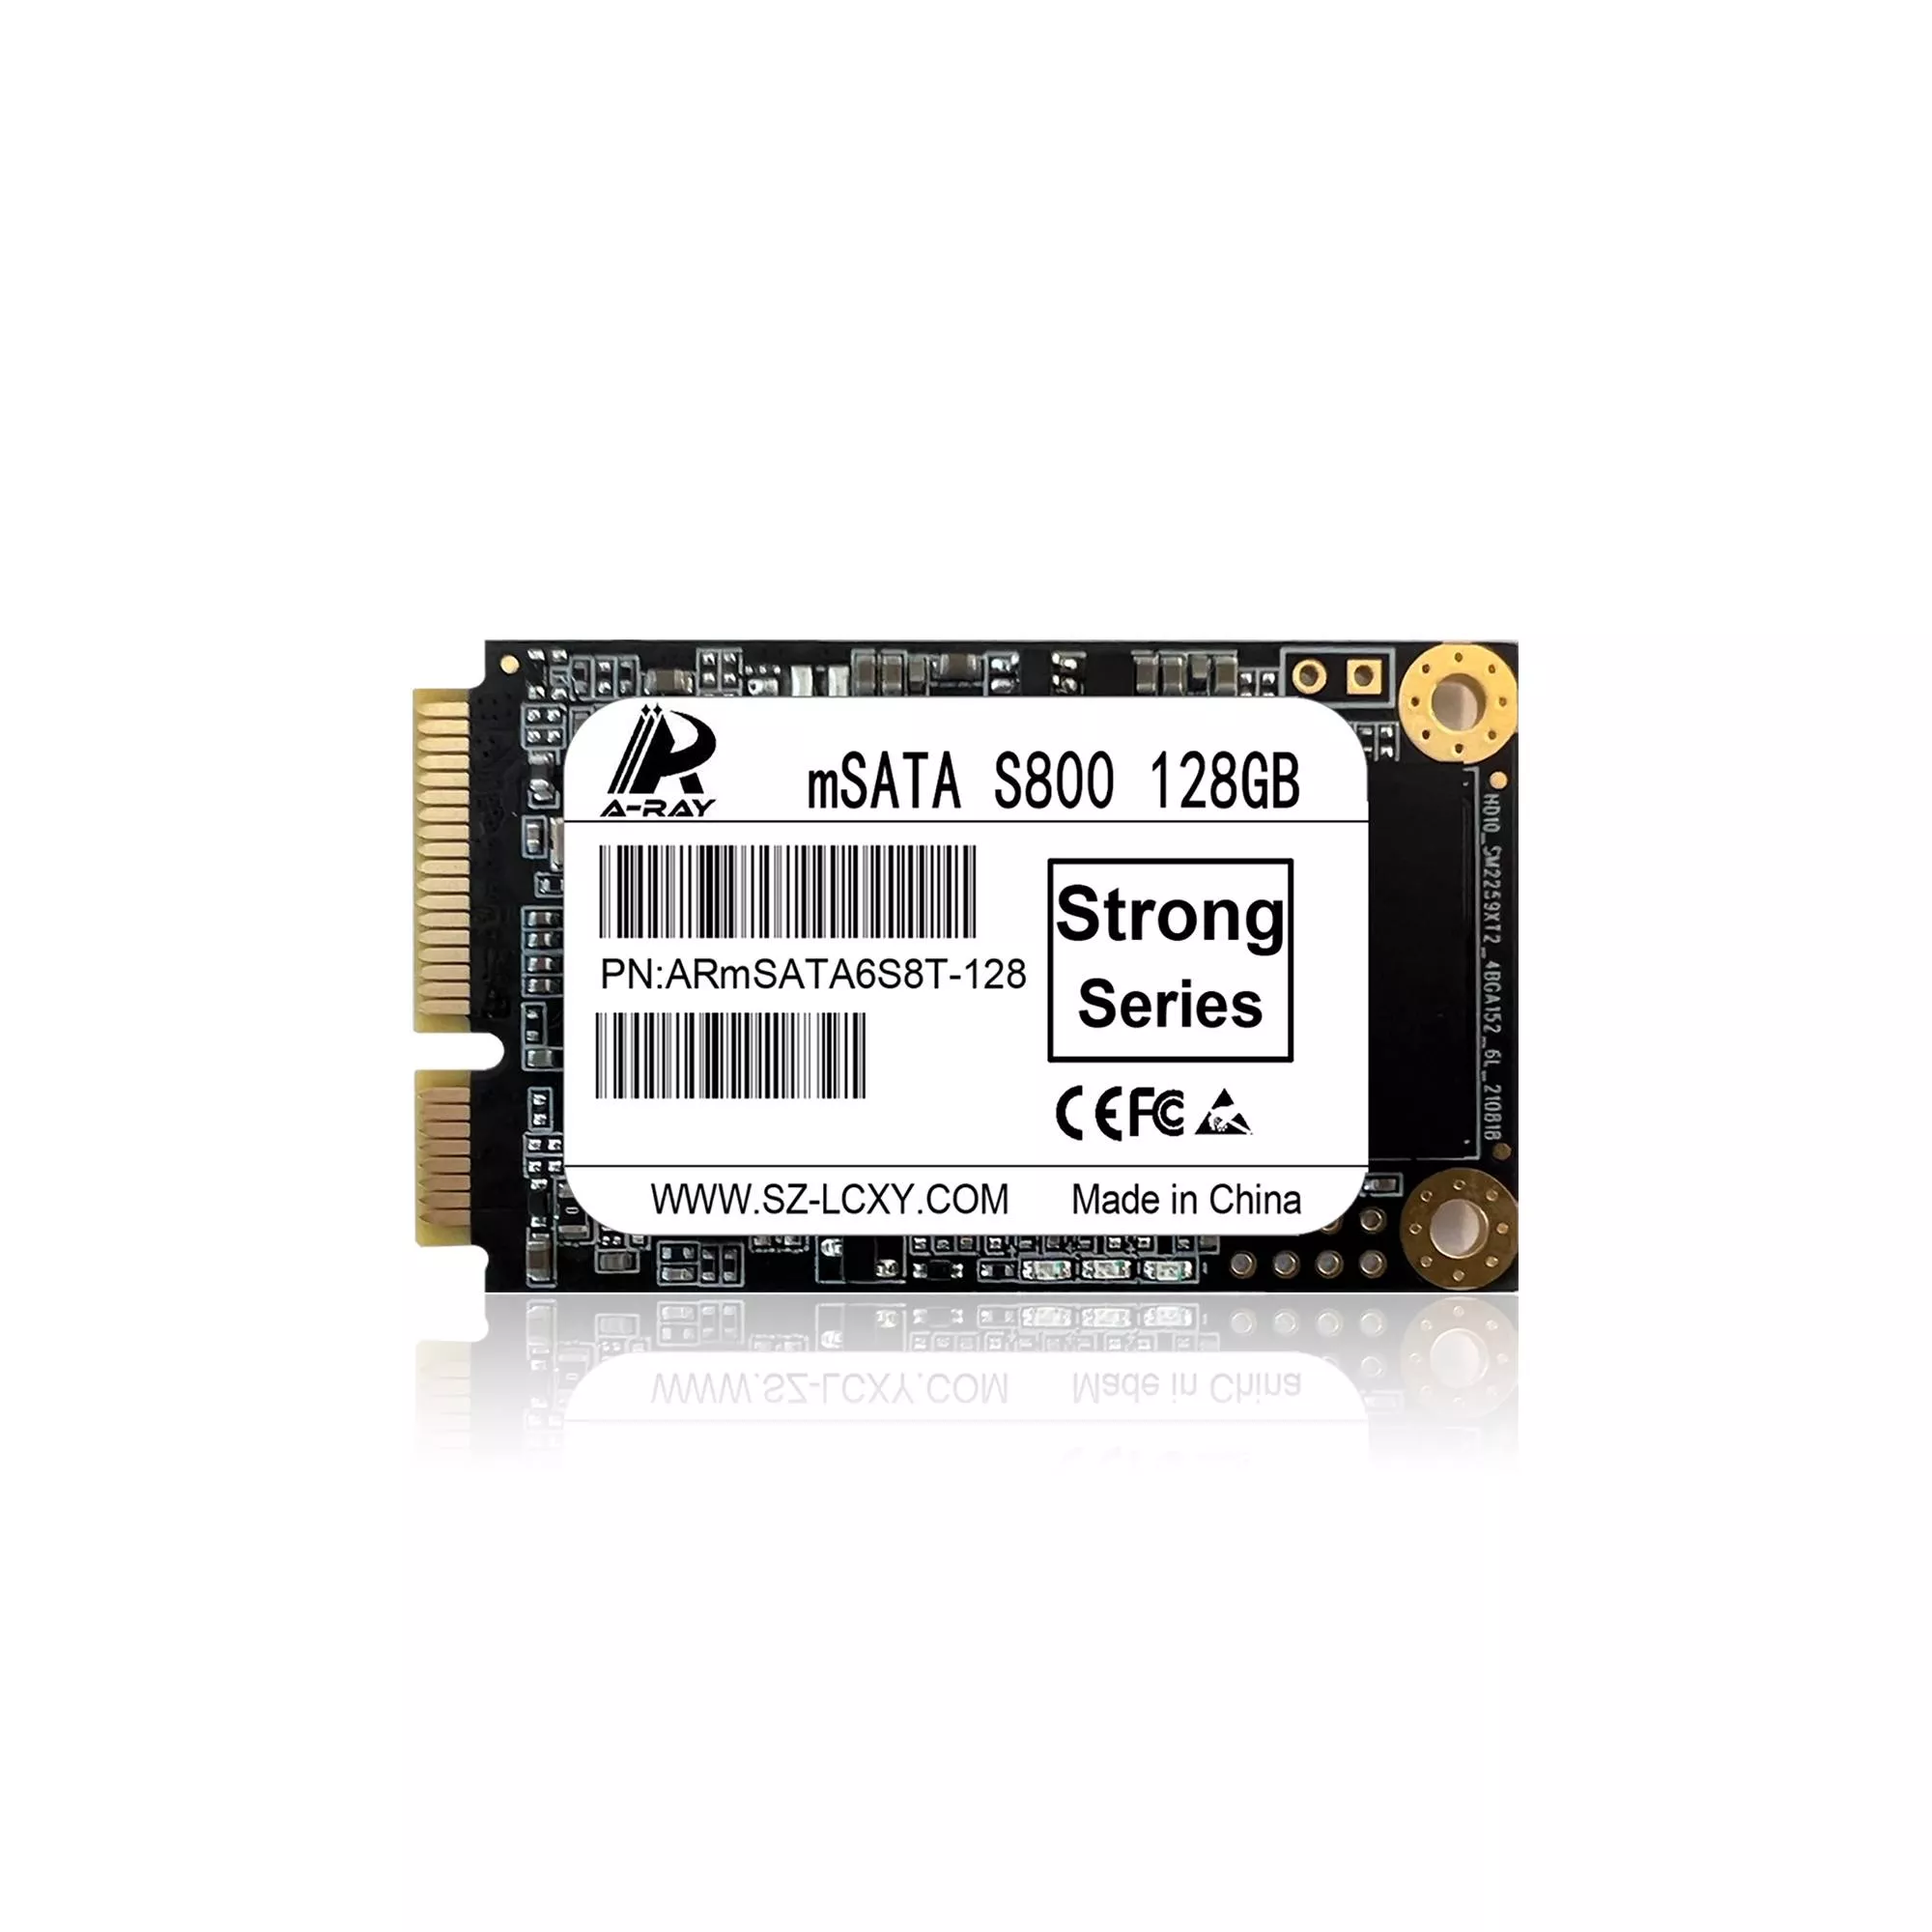 Ổ cứng SSD 128GB A-RAY mSata 6GBps S800 Strong Series